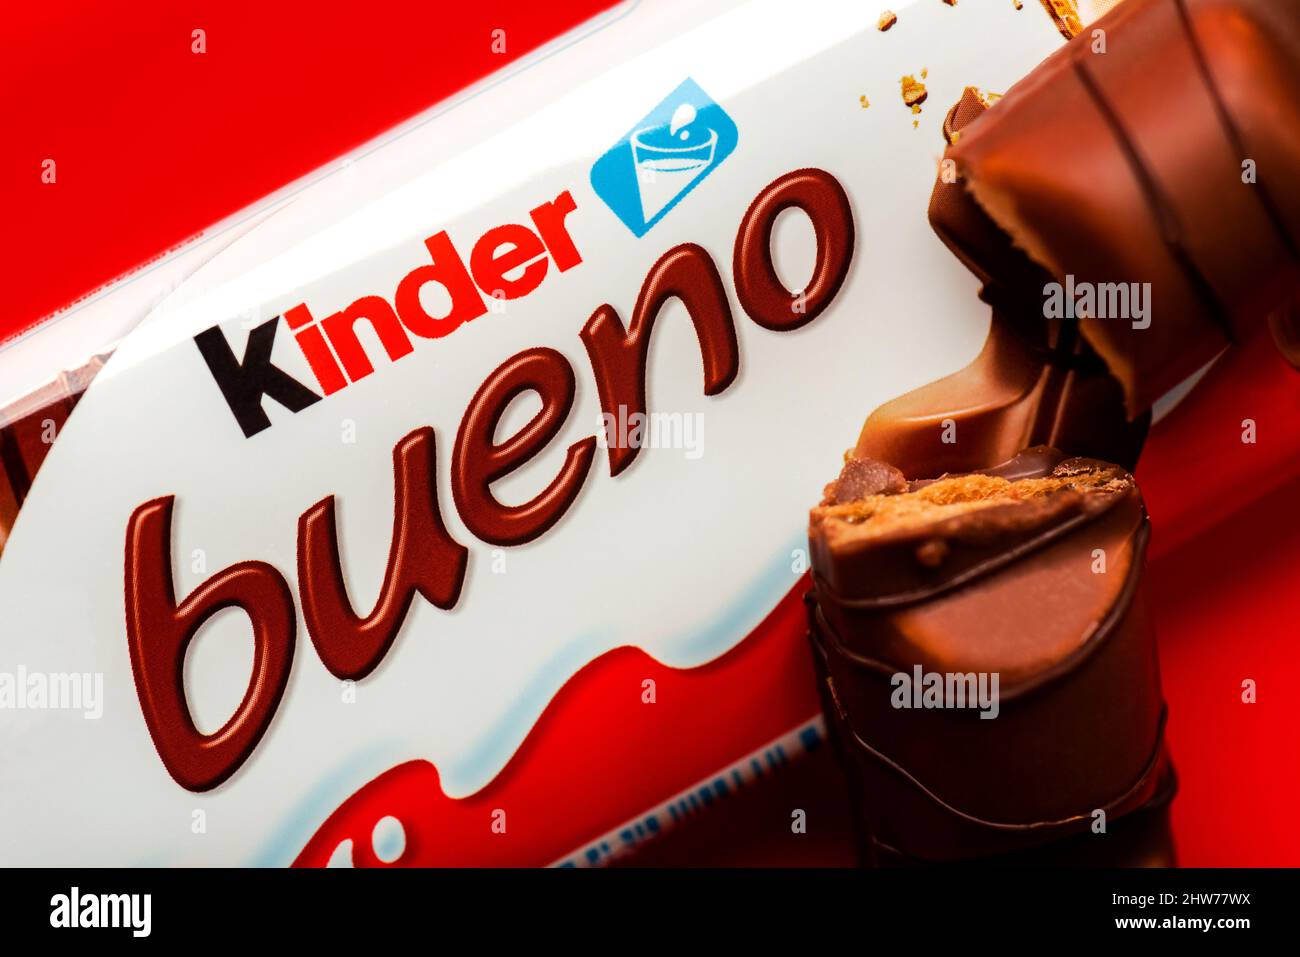 Closeup of package of Kinder bueno and Kinder Bueno milk chocolate bar over red background Stock Photo